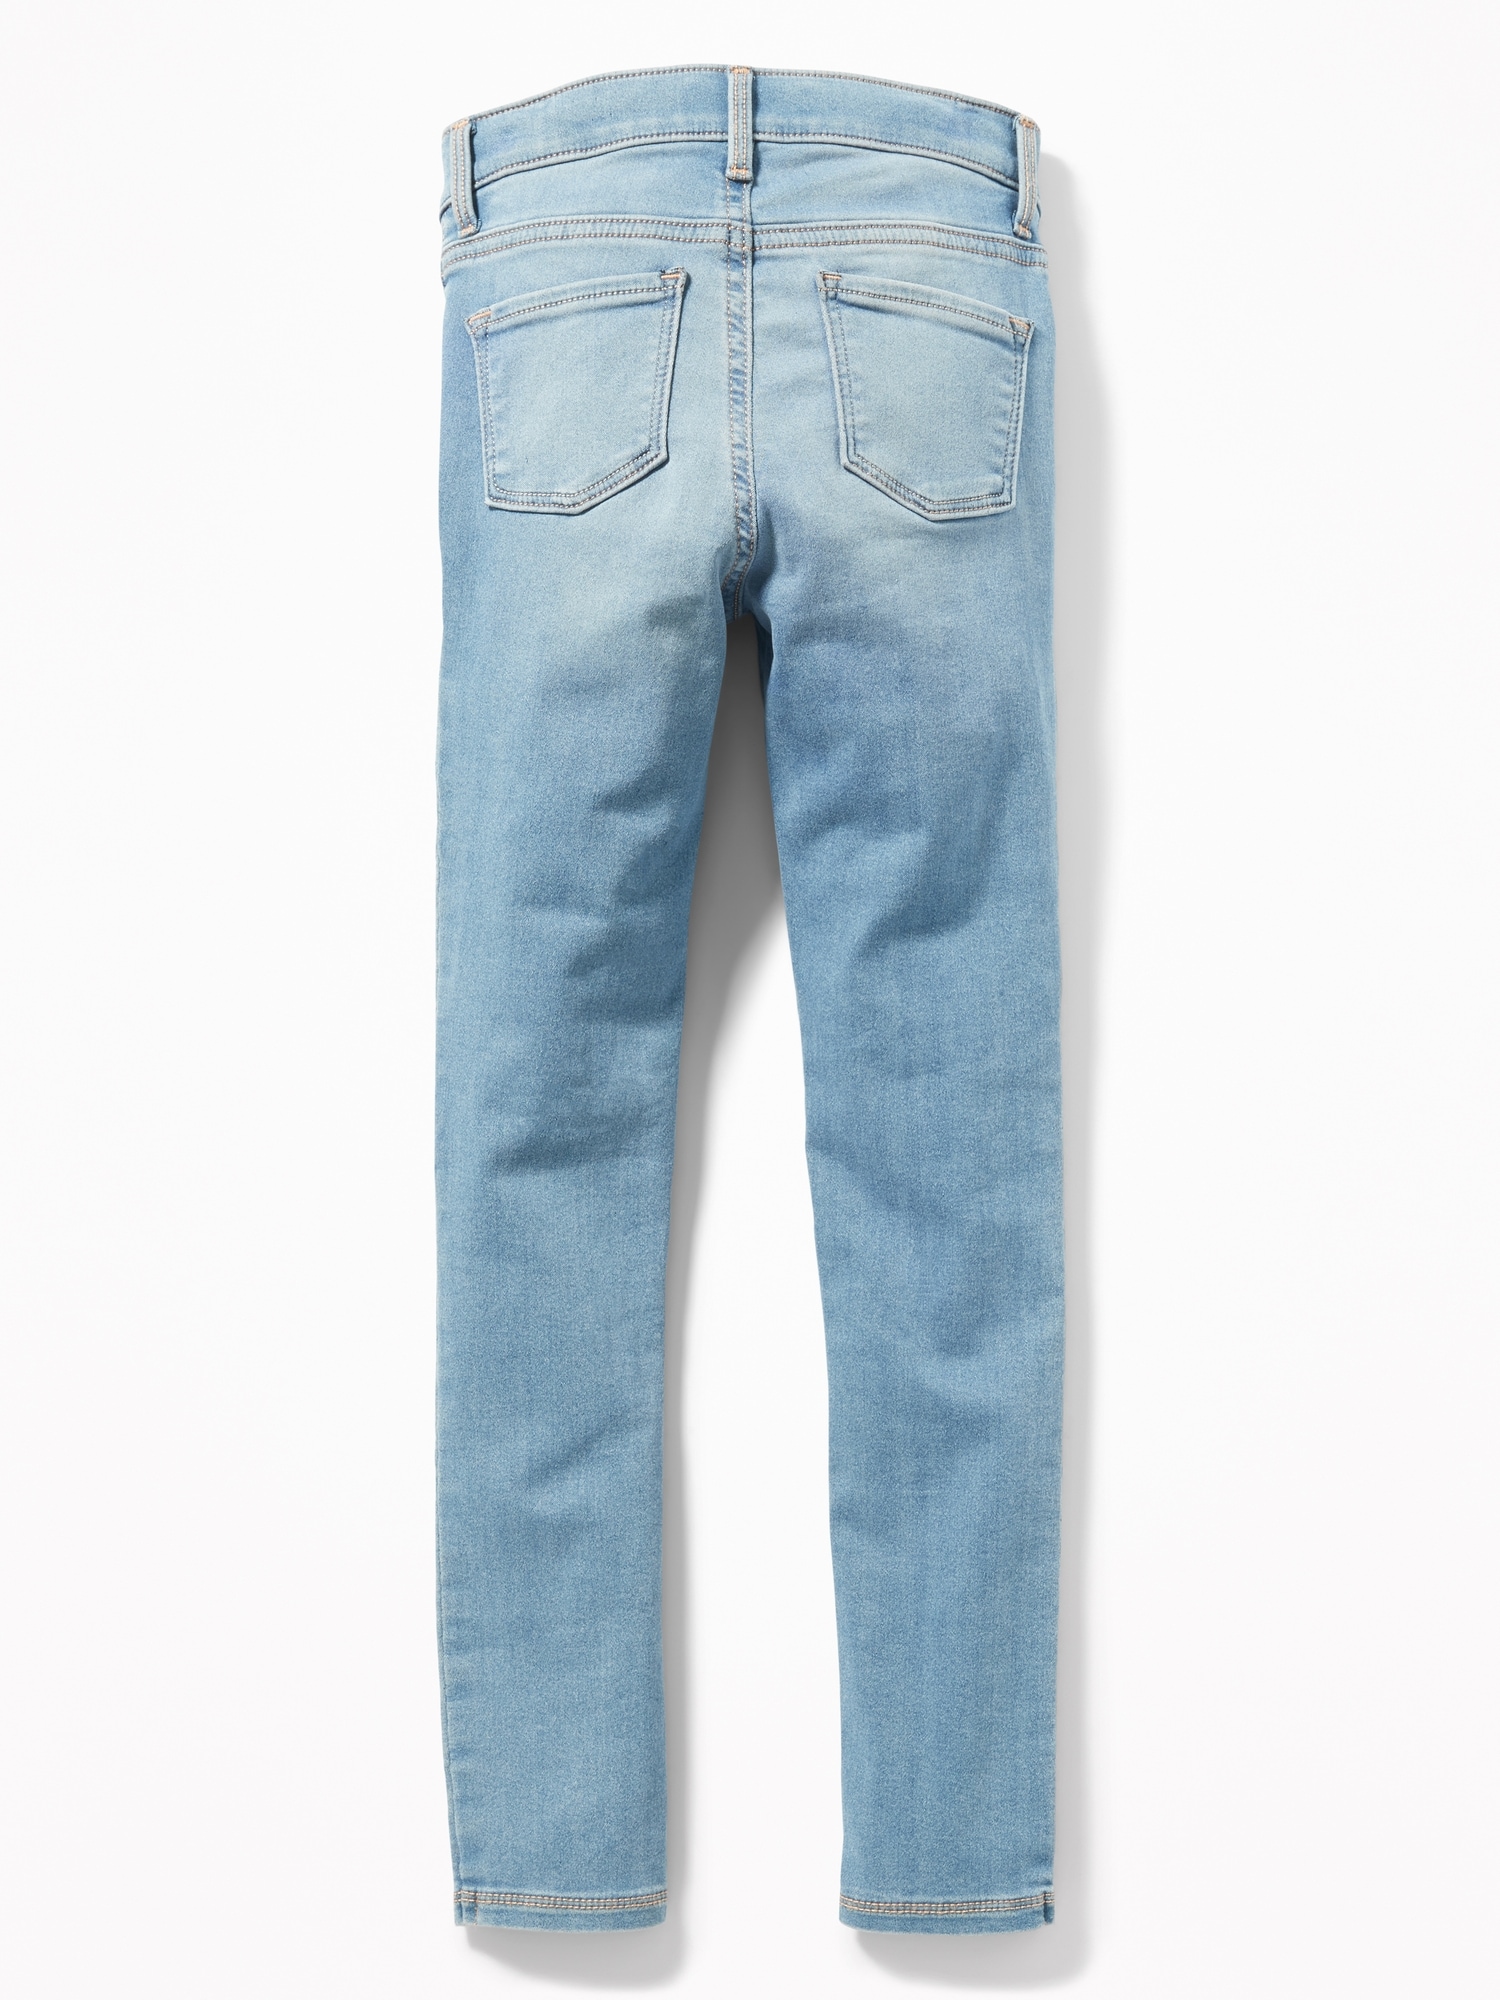 Buy Blue Jeans & Jeggings for Girls by MARZIPAN YG Online